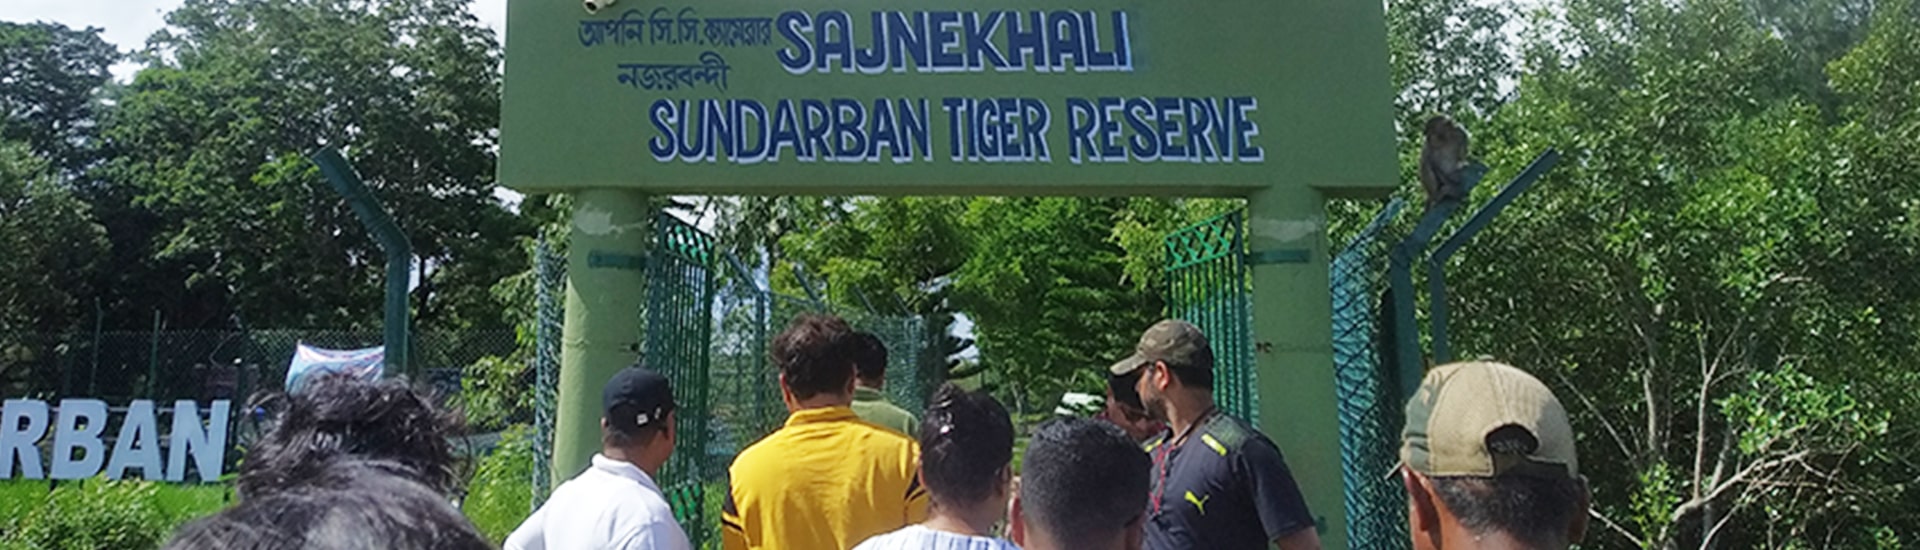 Is it possible to travel sundarban in a short period?